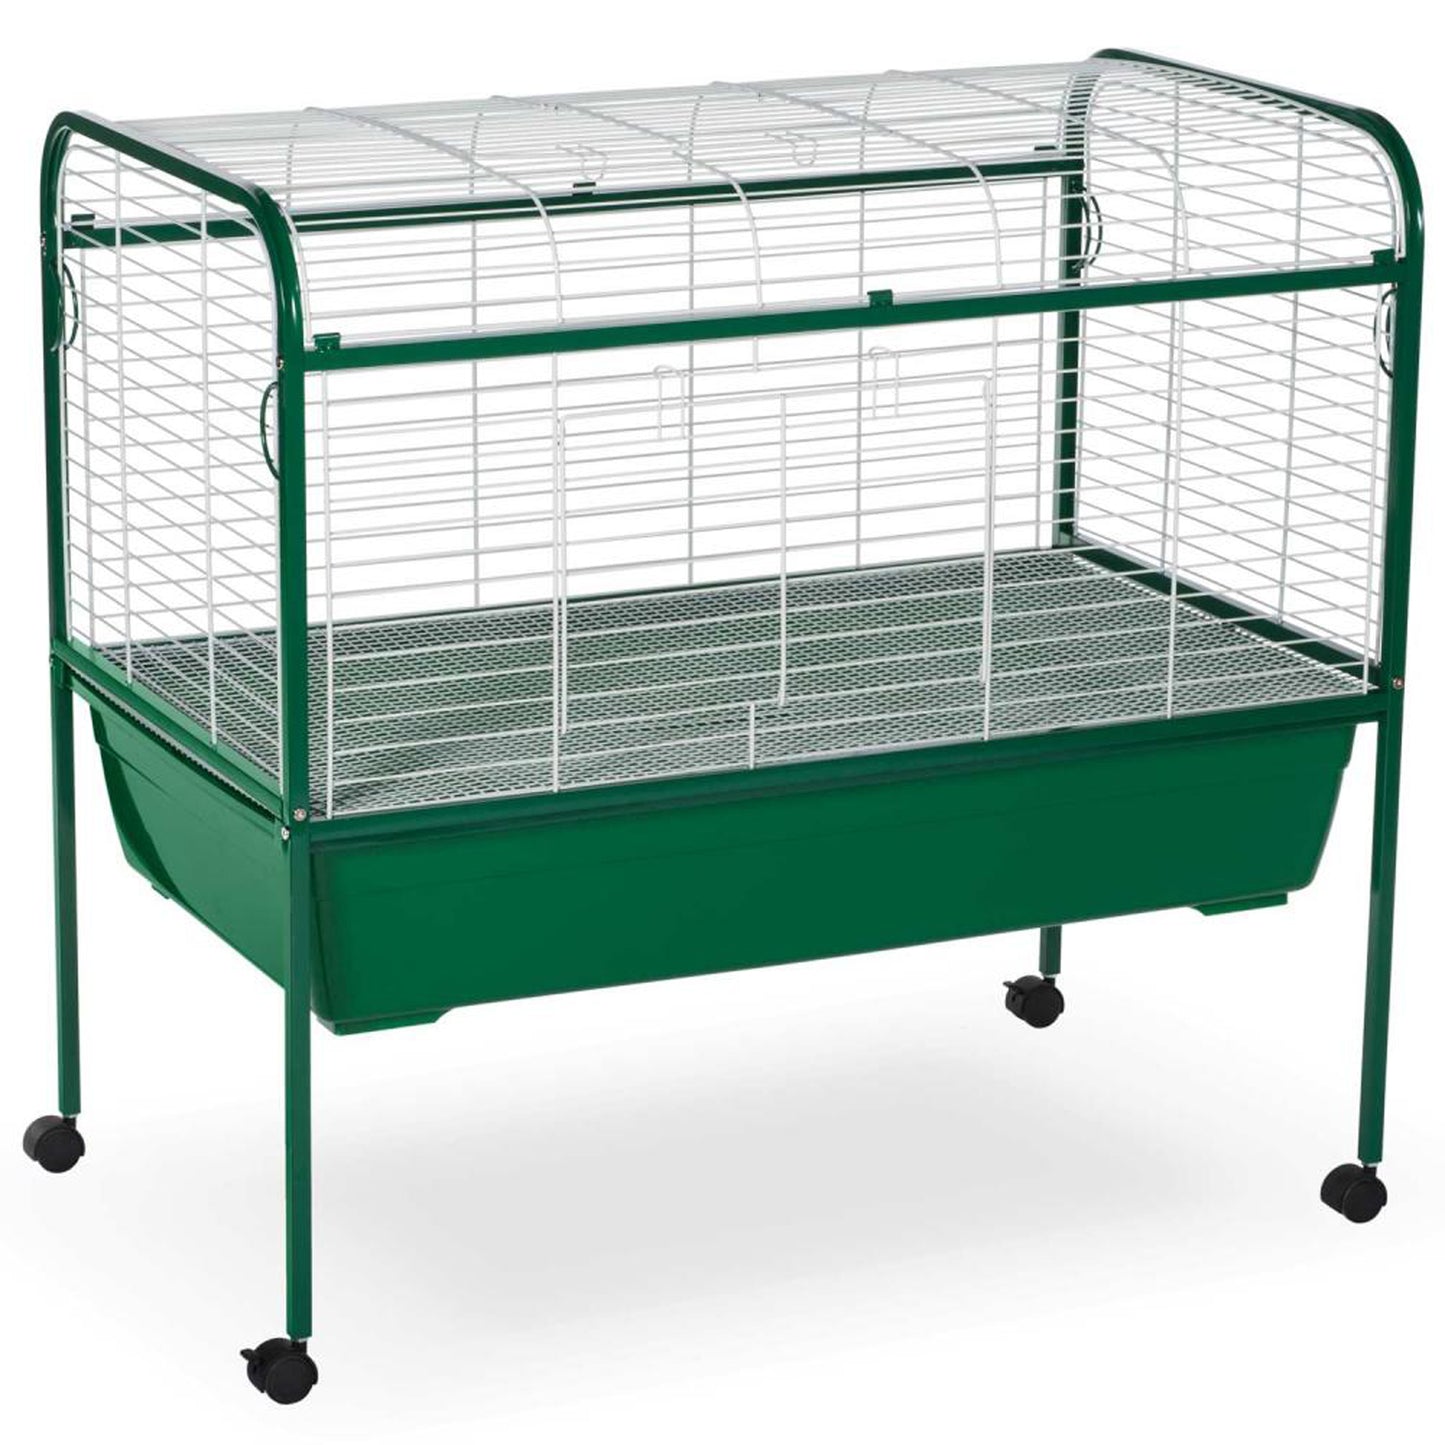 Prevue Pet Products Jumbo Small Animal Cage With Stand Green and White 40X22X37In